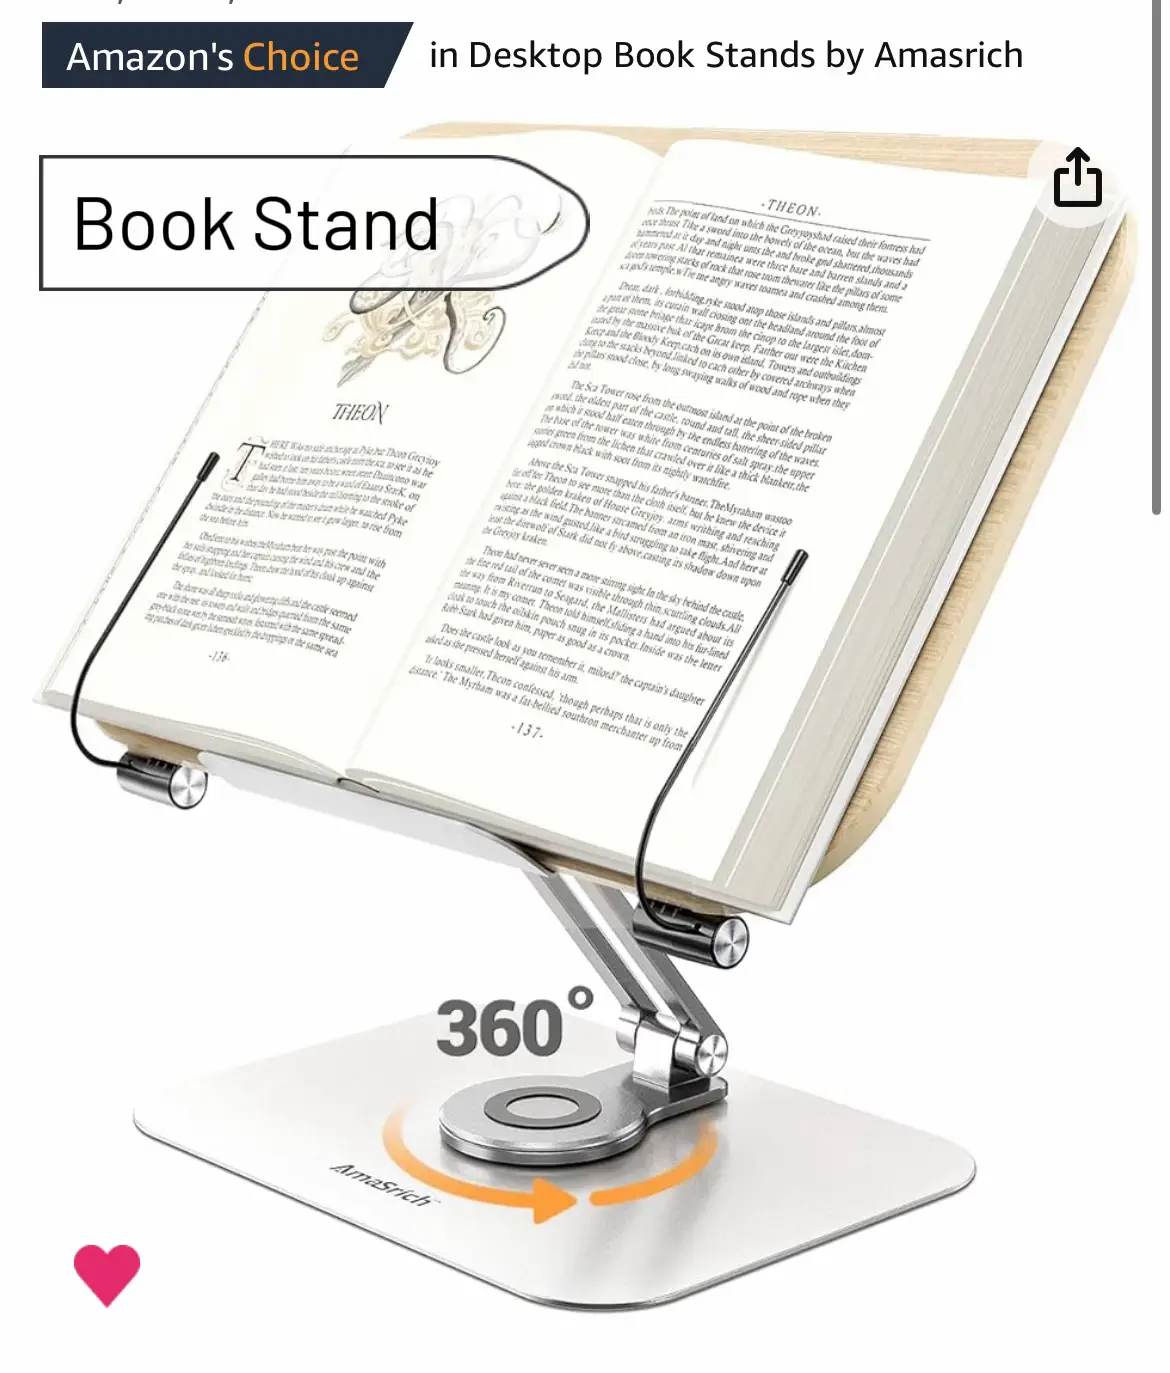  A book stand with a 360 degree view.